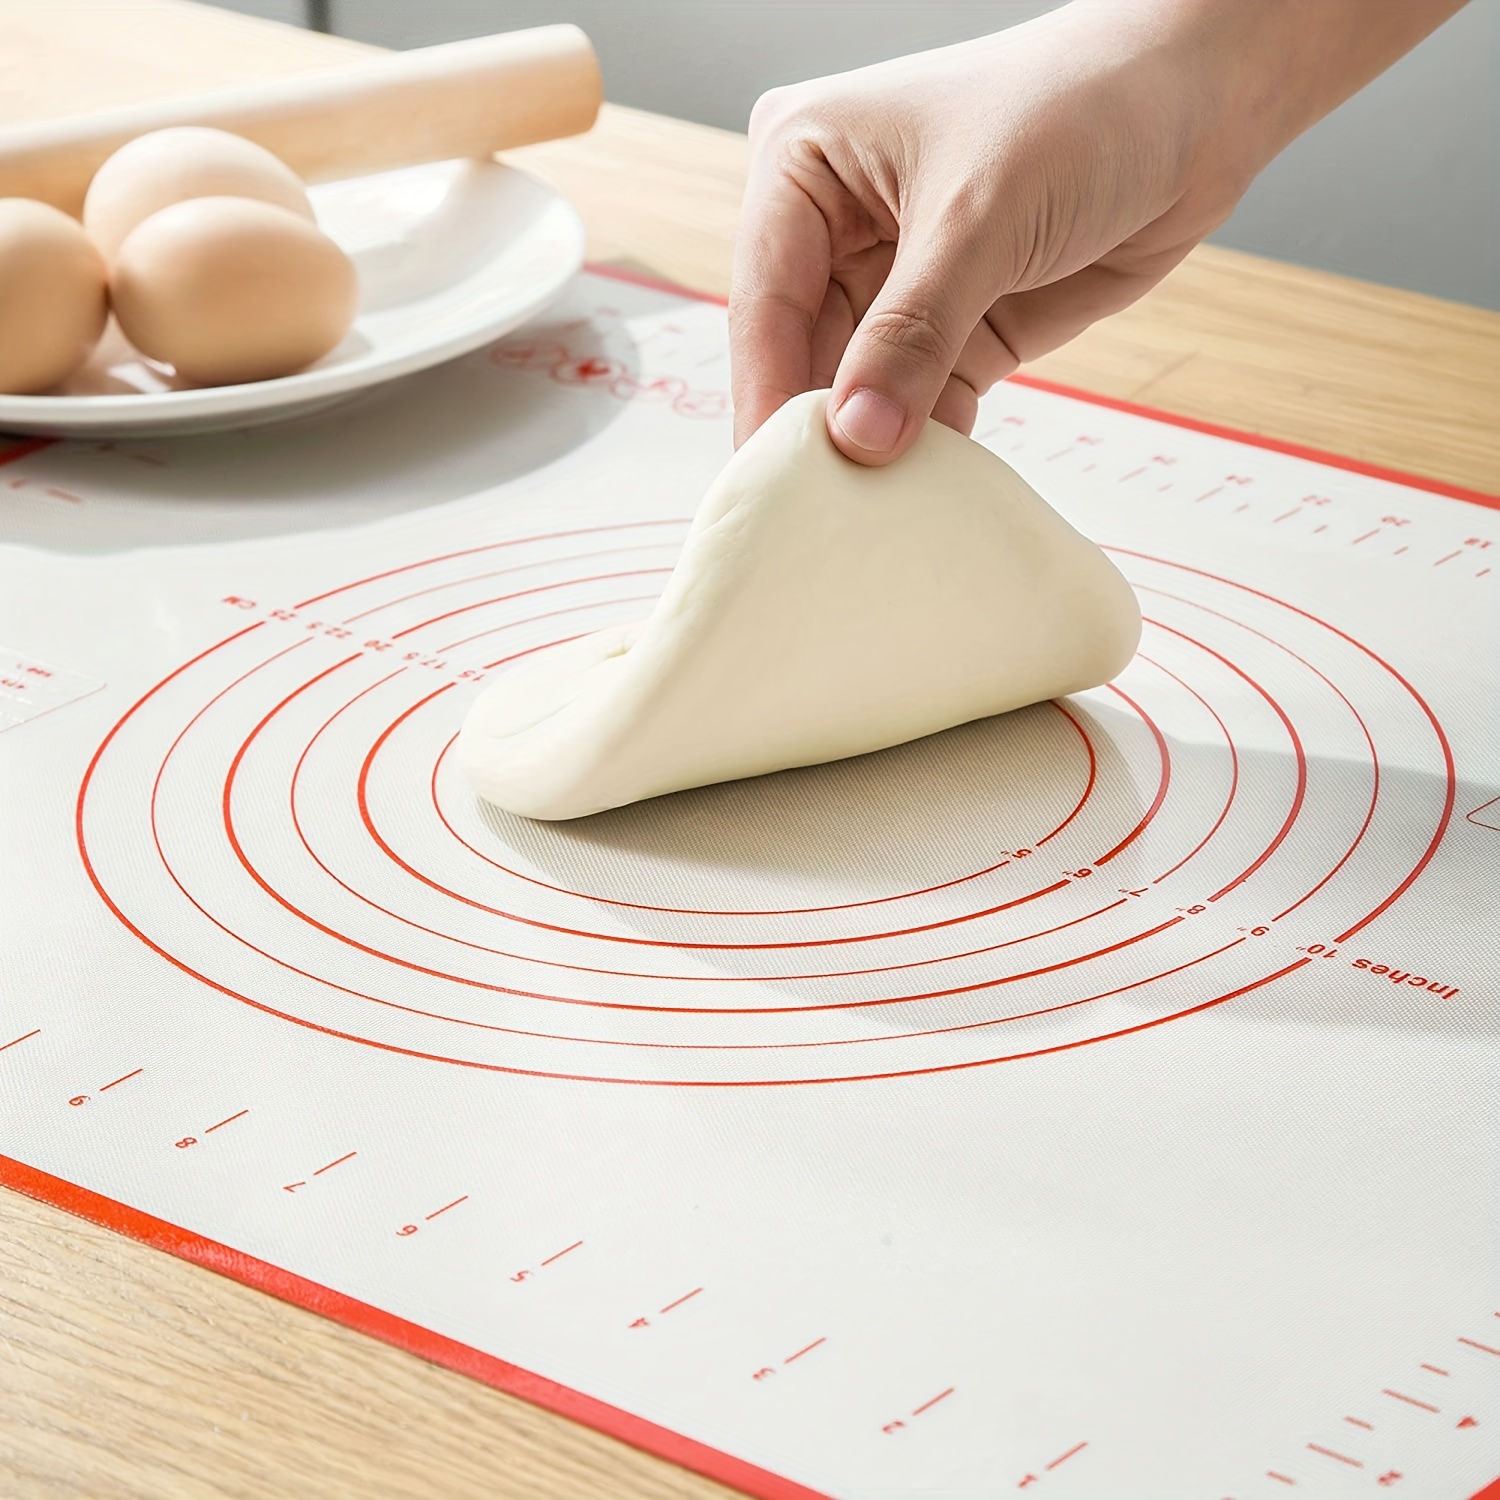 Super Kitchen Large Silicone Baking Mat 16x24 inch Pastry Mat for Rolling Dough Board with Measurements, Size: 16 x 24, Red